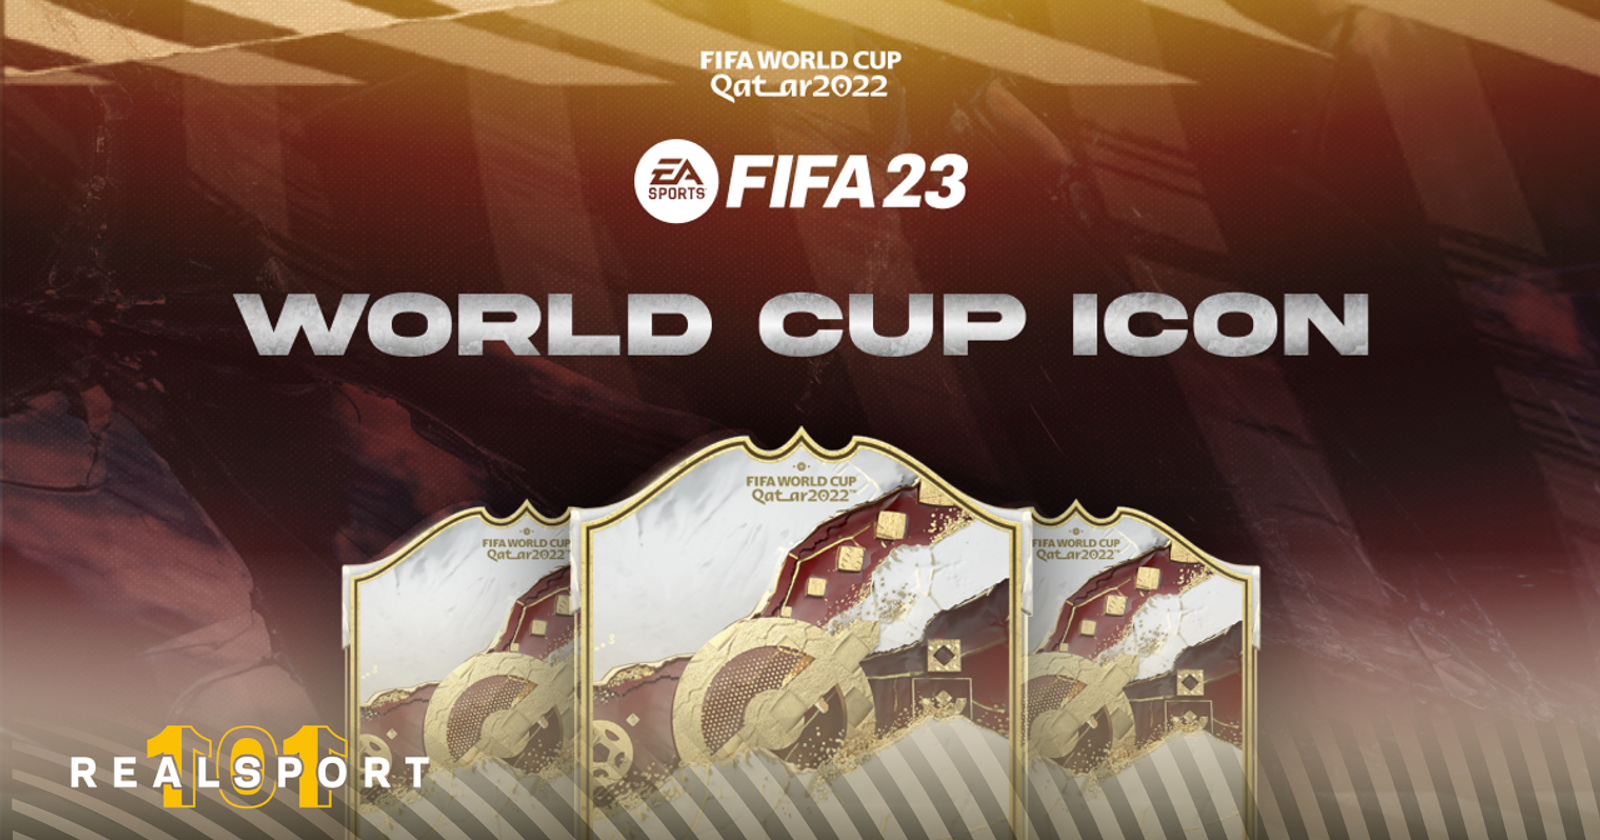 FIFA 23 Path to Glory Players and Heroes: Best FUT World Cup Cards